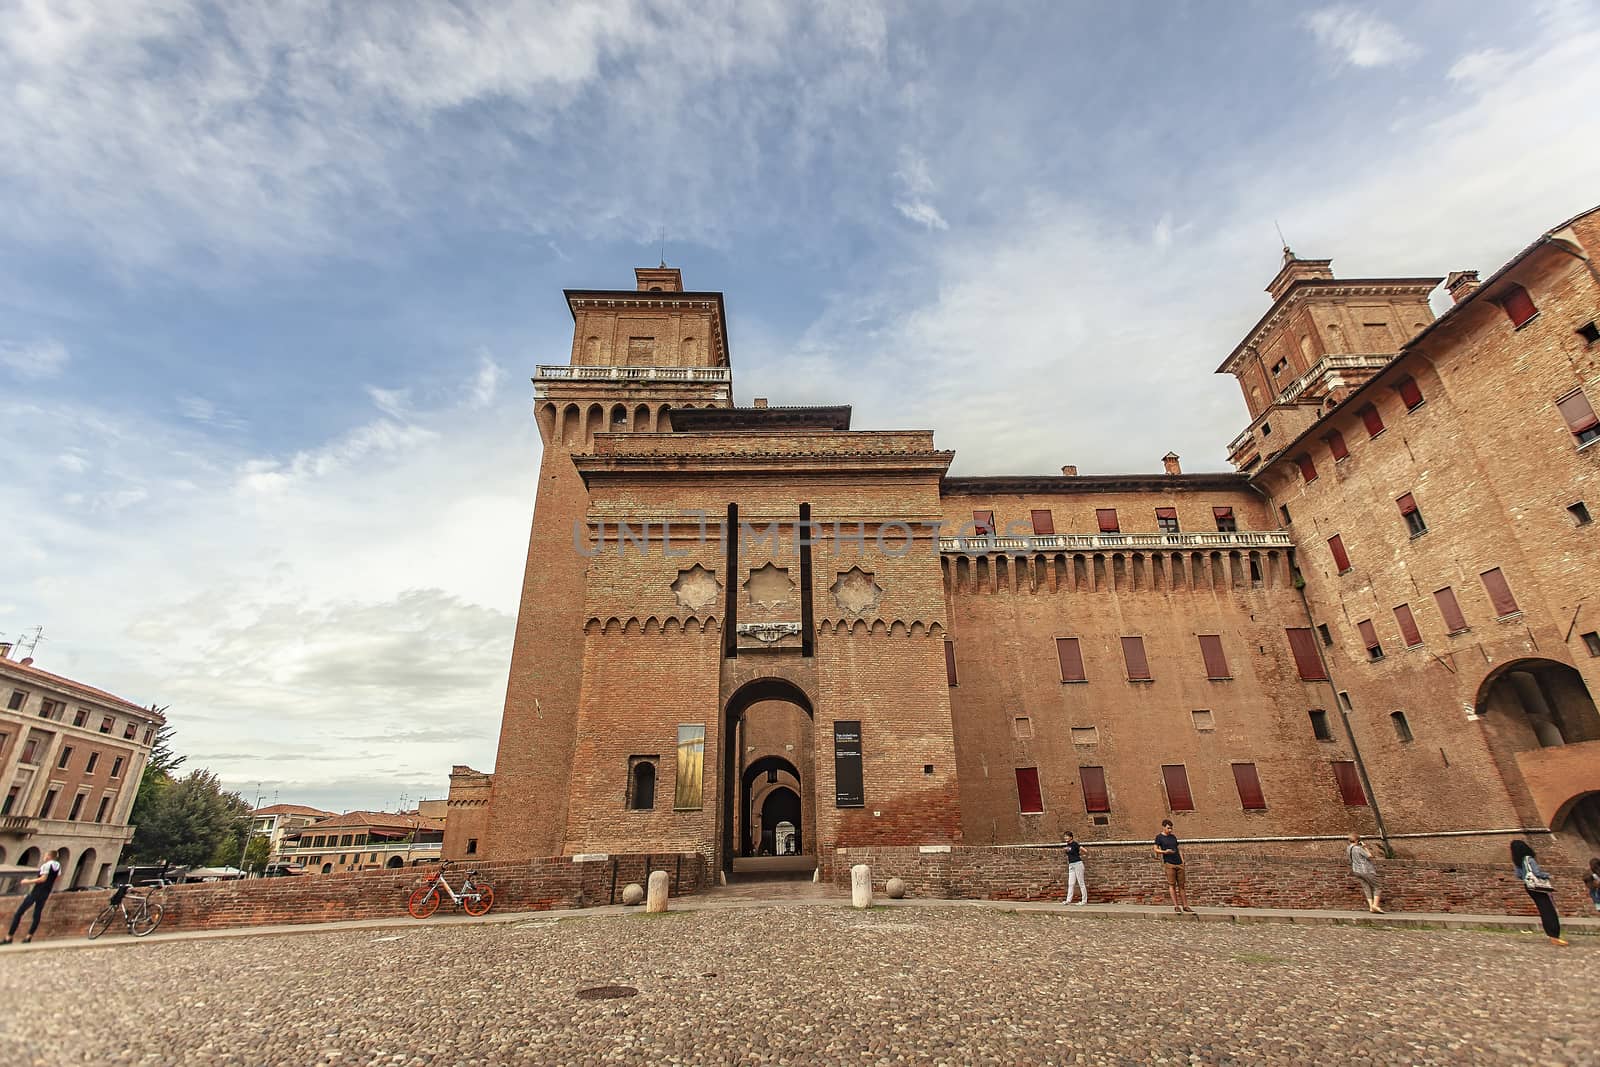 Medieval castle of Ferrara the historical Italian city 7 by pippocarlot